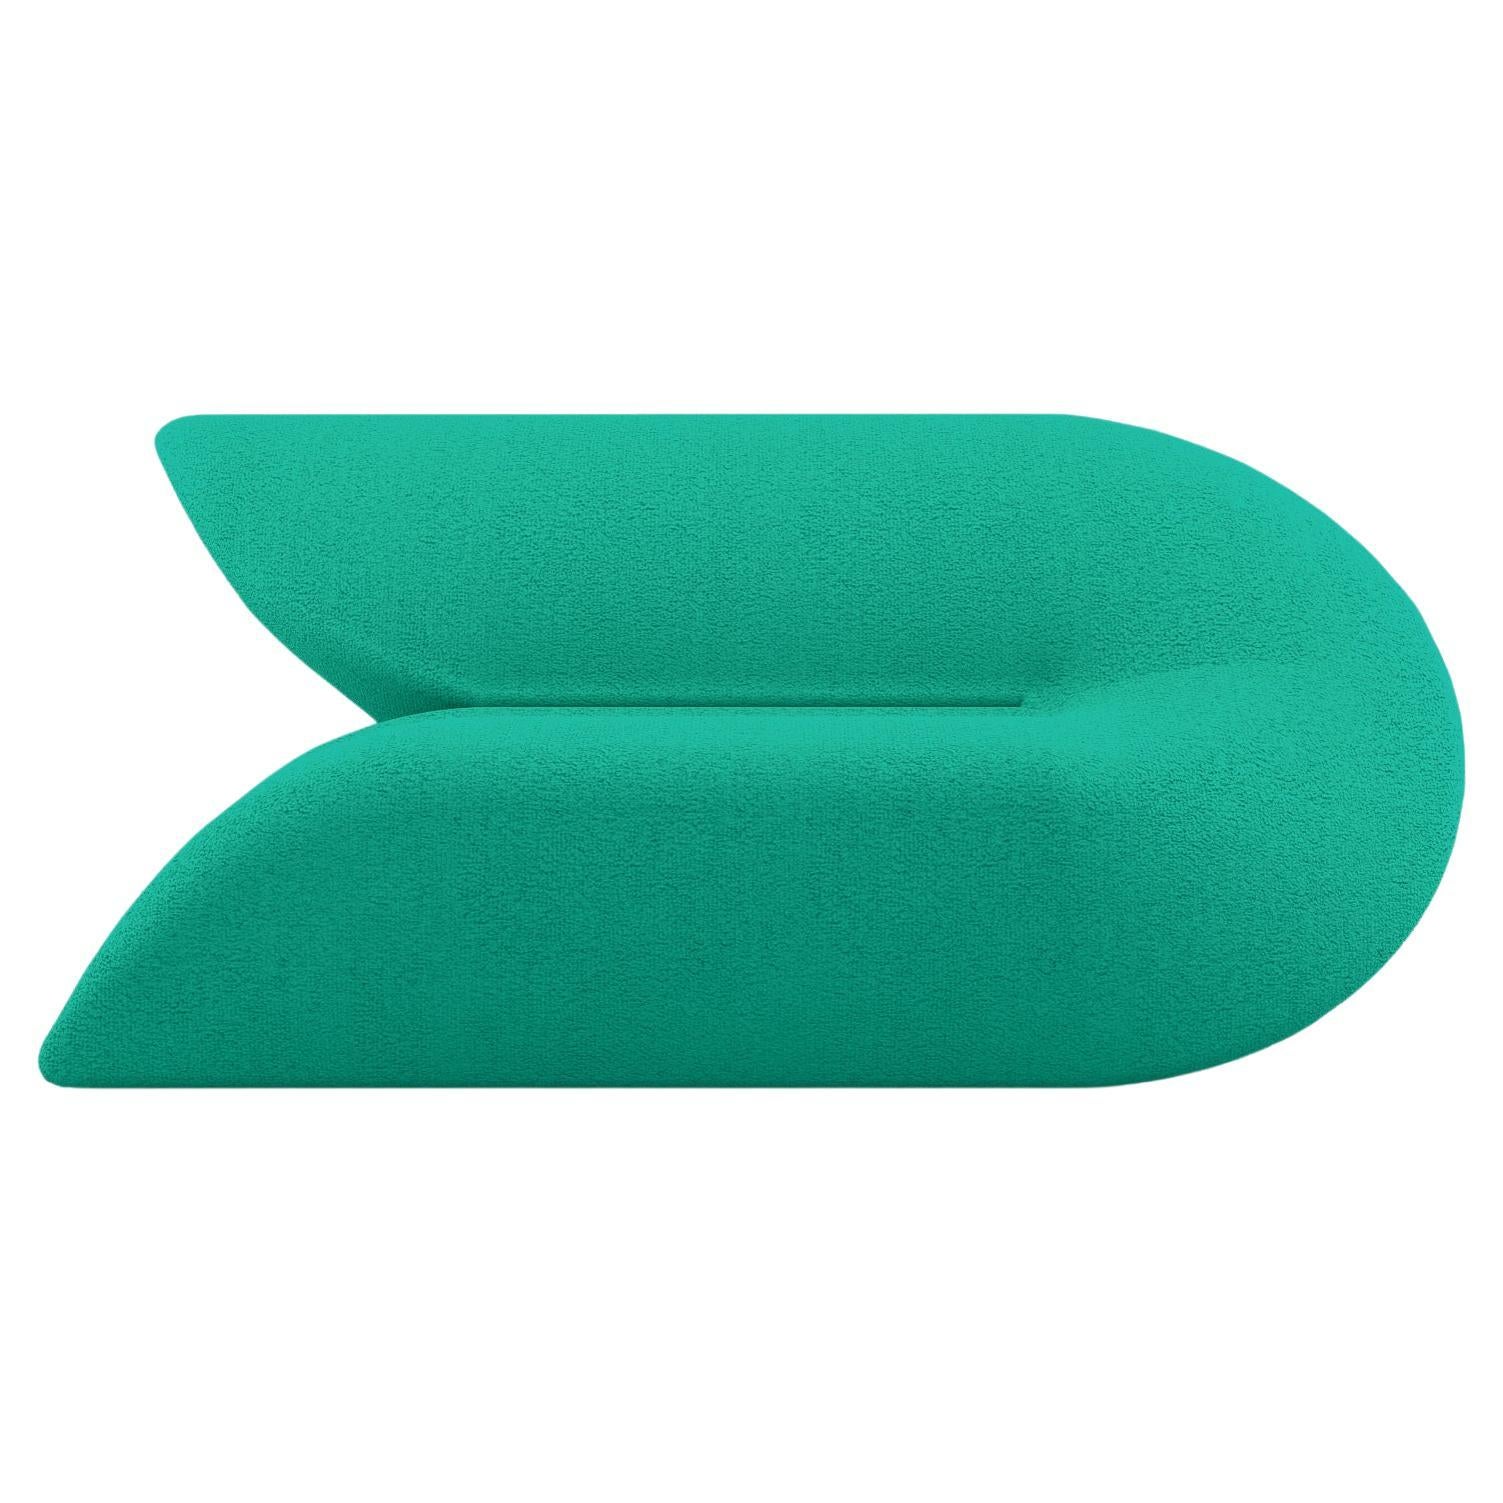 Delta Sofa - Modern Turquoise Upholstered Two Seat Sofa For Sale